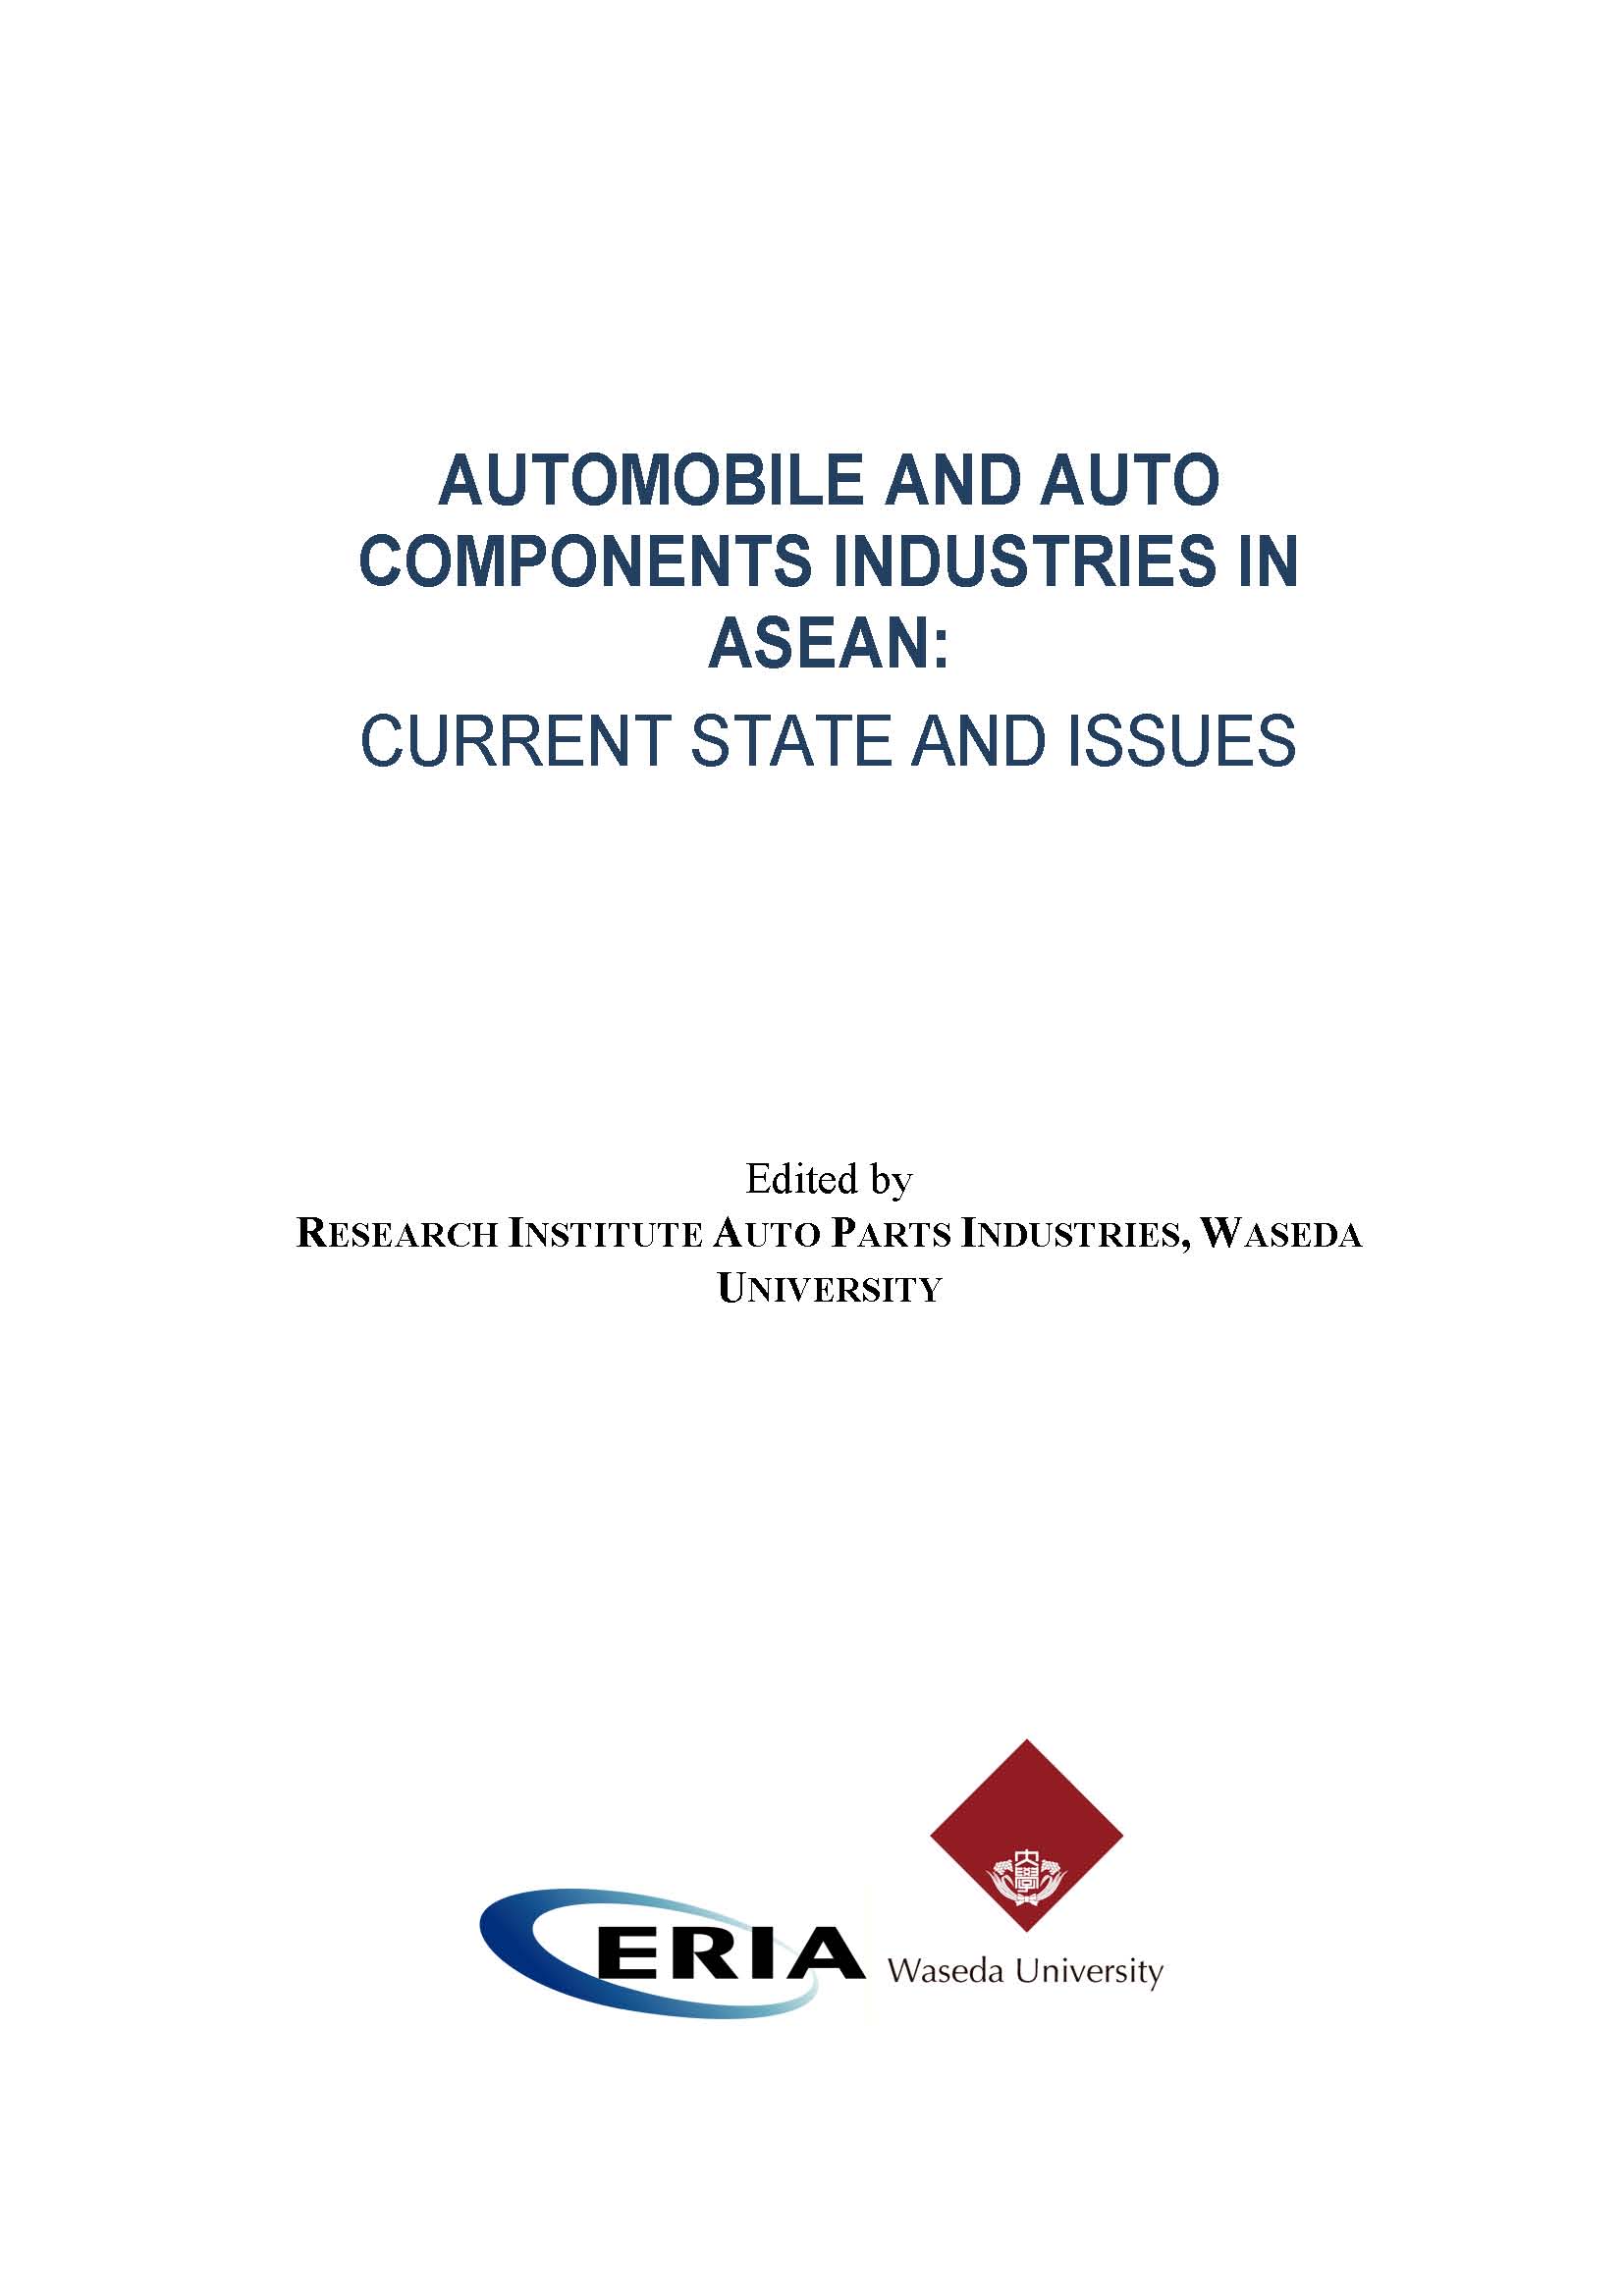 Automobile and Auto Components Industries in ASEAN: Current State and Issues